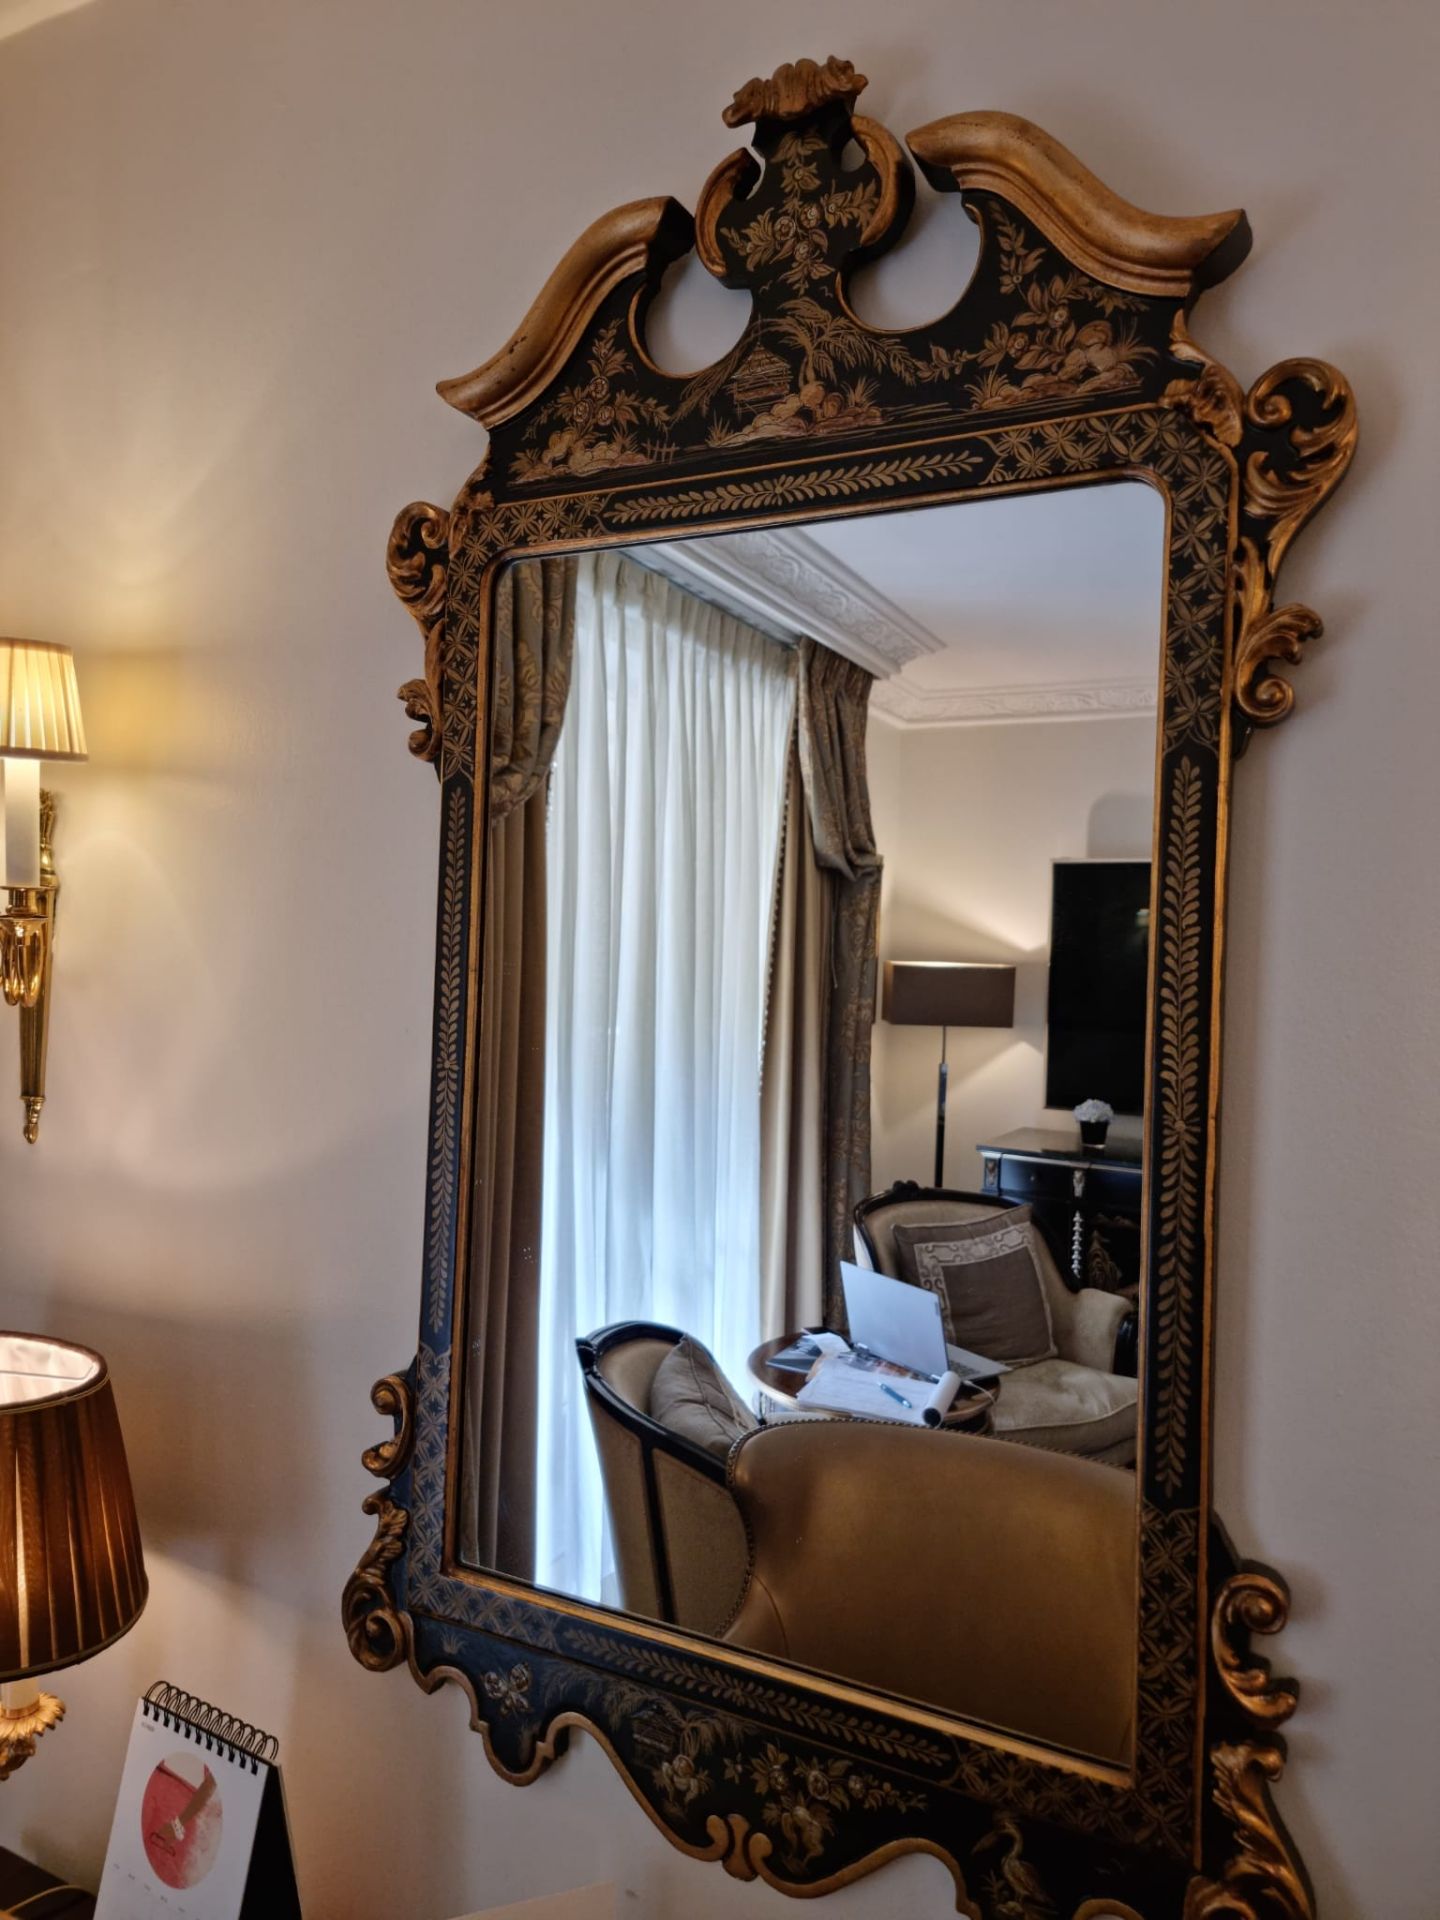 Black Lacquered And Gilt Accent Mirror With Cartouche Pediment 72 x 120cm (Room 105 - Image 2 of 3